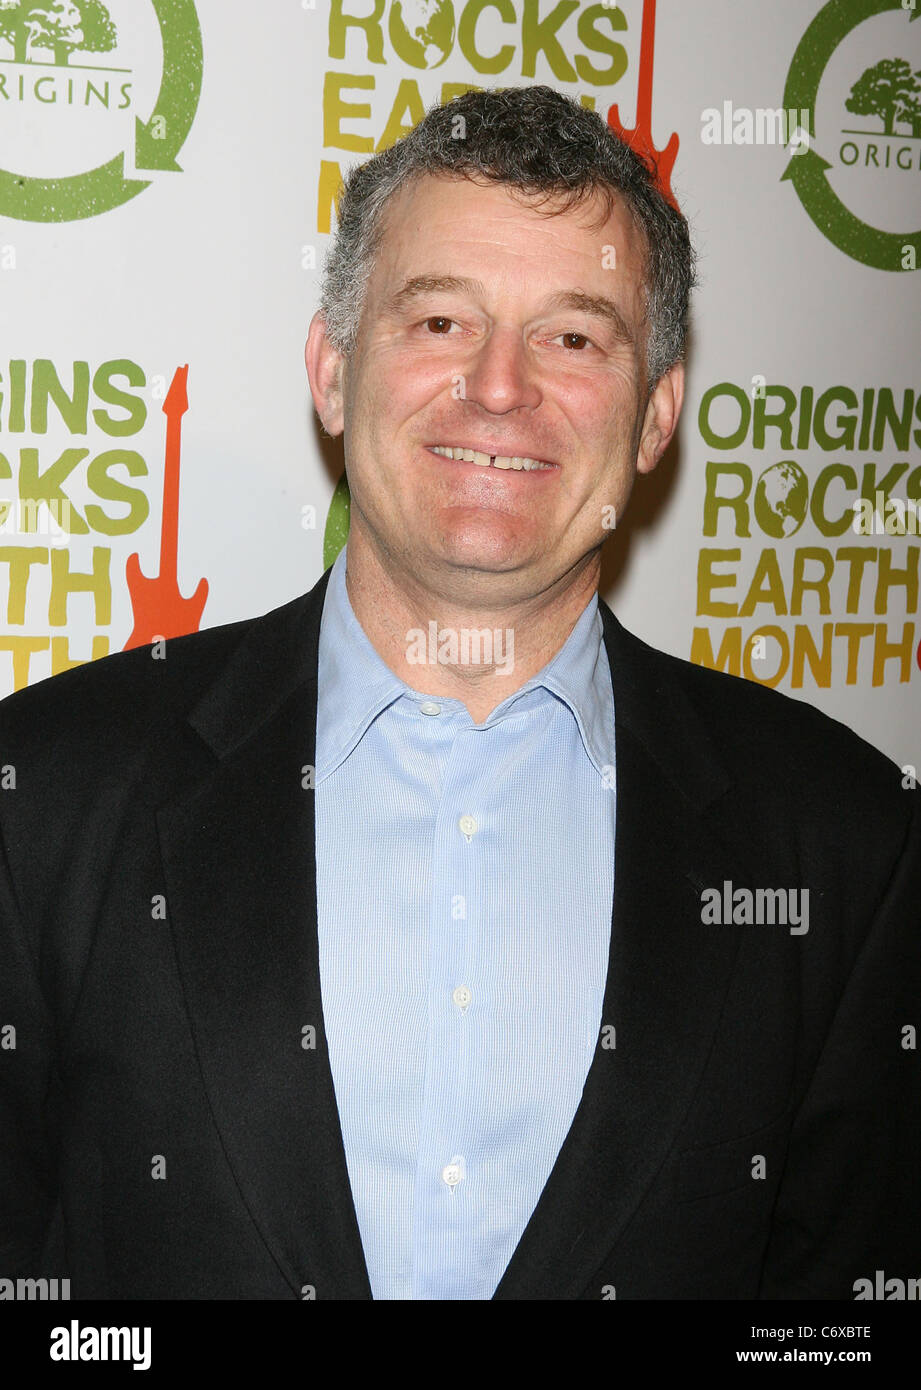 William Lauder Concert benefiting Origins Global Earth Initiatives at Webster Hall New York City, USA - 19.04.10 Stock Photo